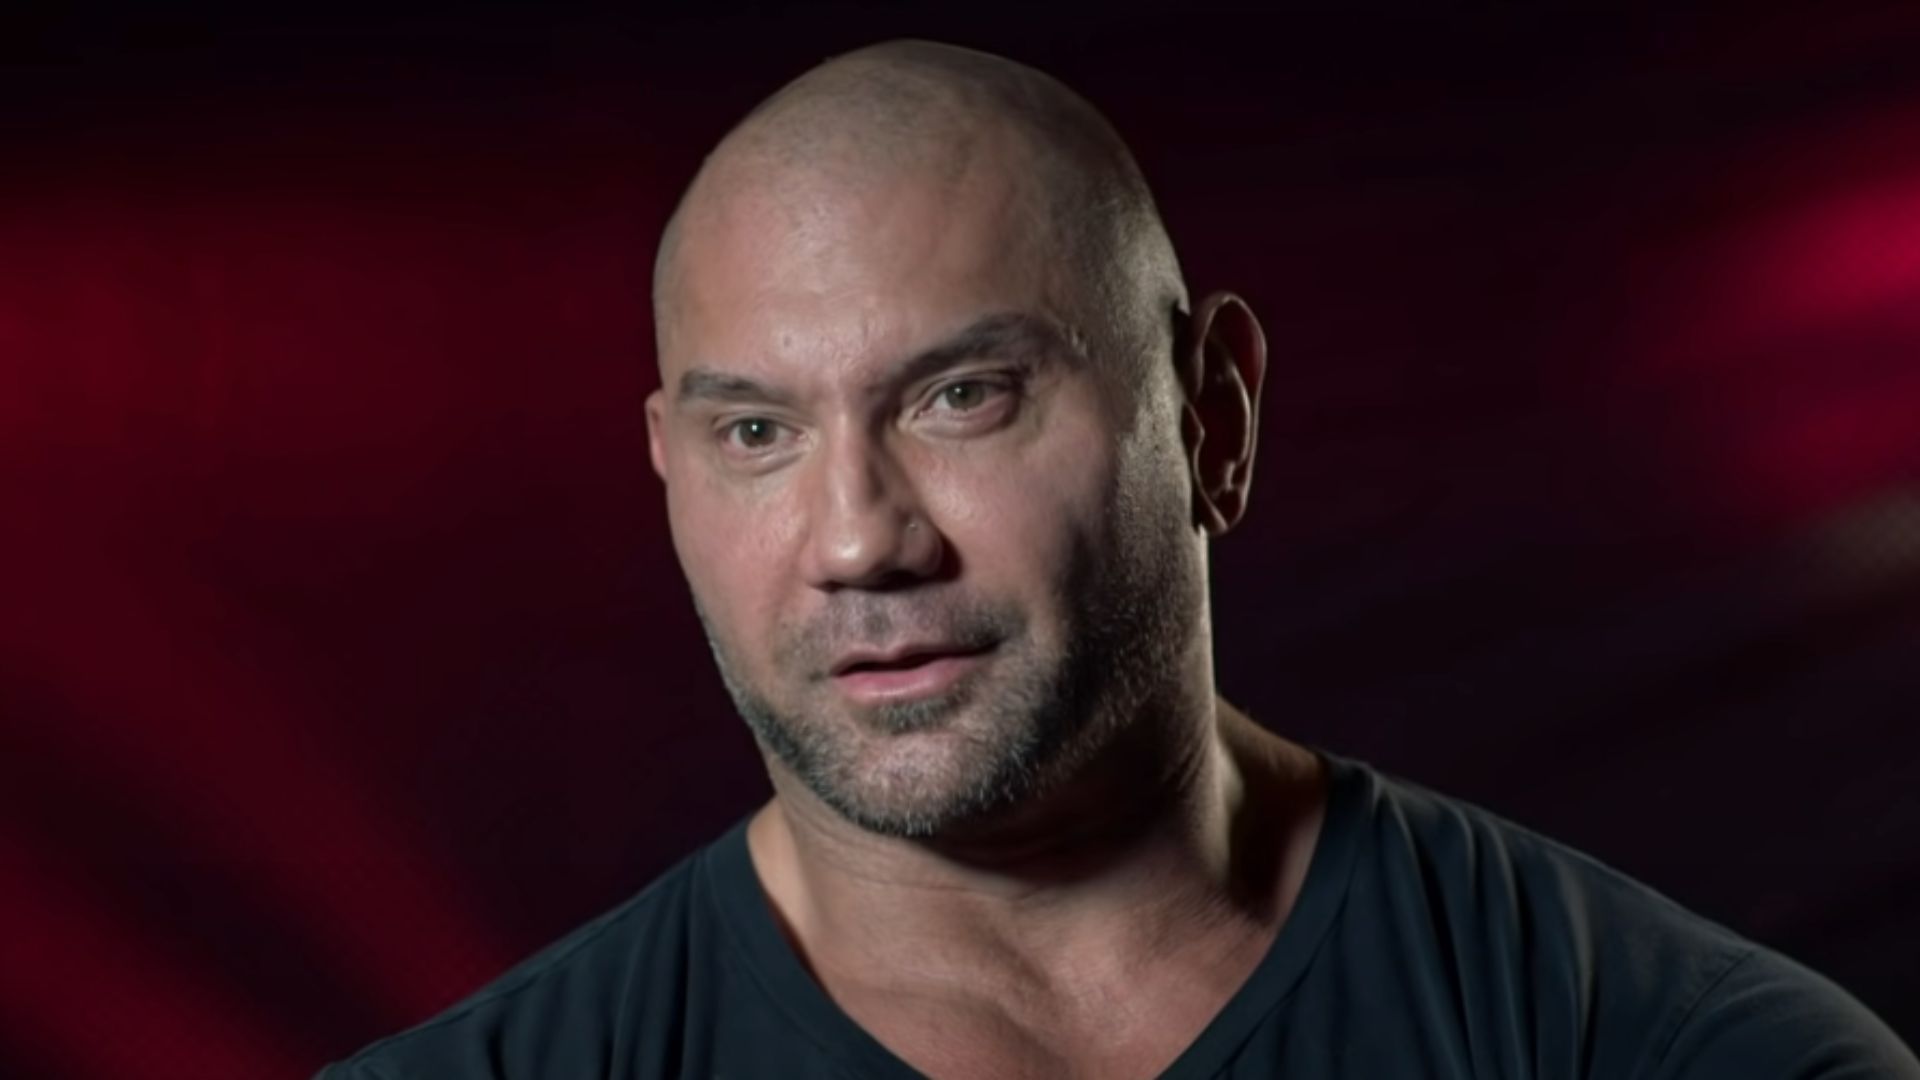 Batista was one of the top WWE stars of his generation.